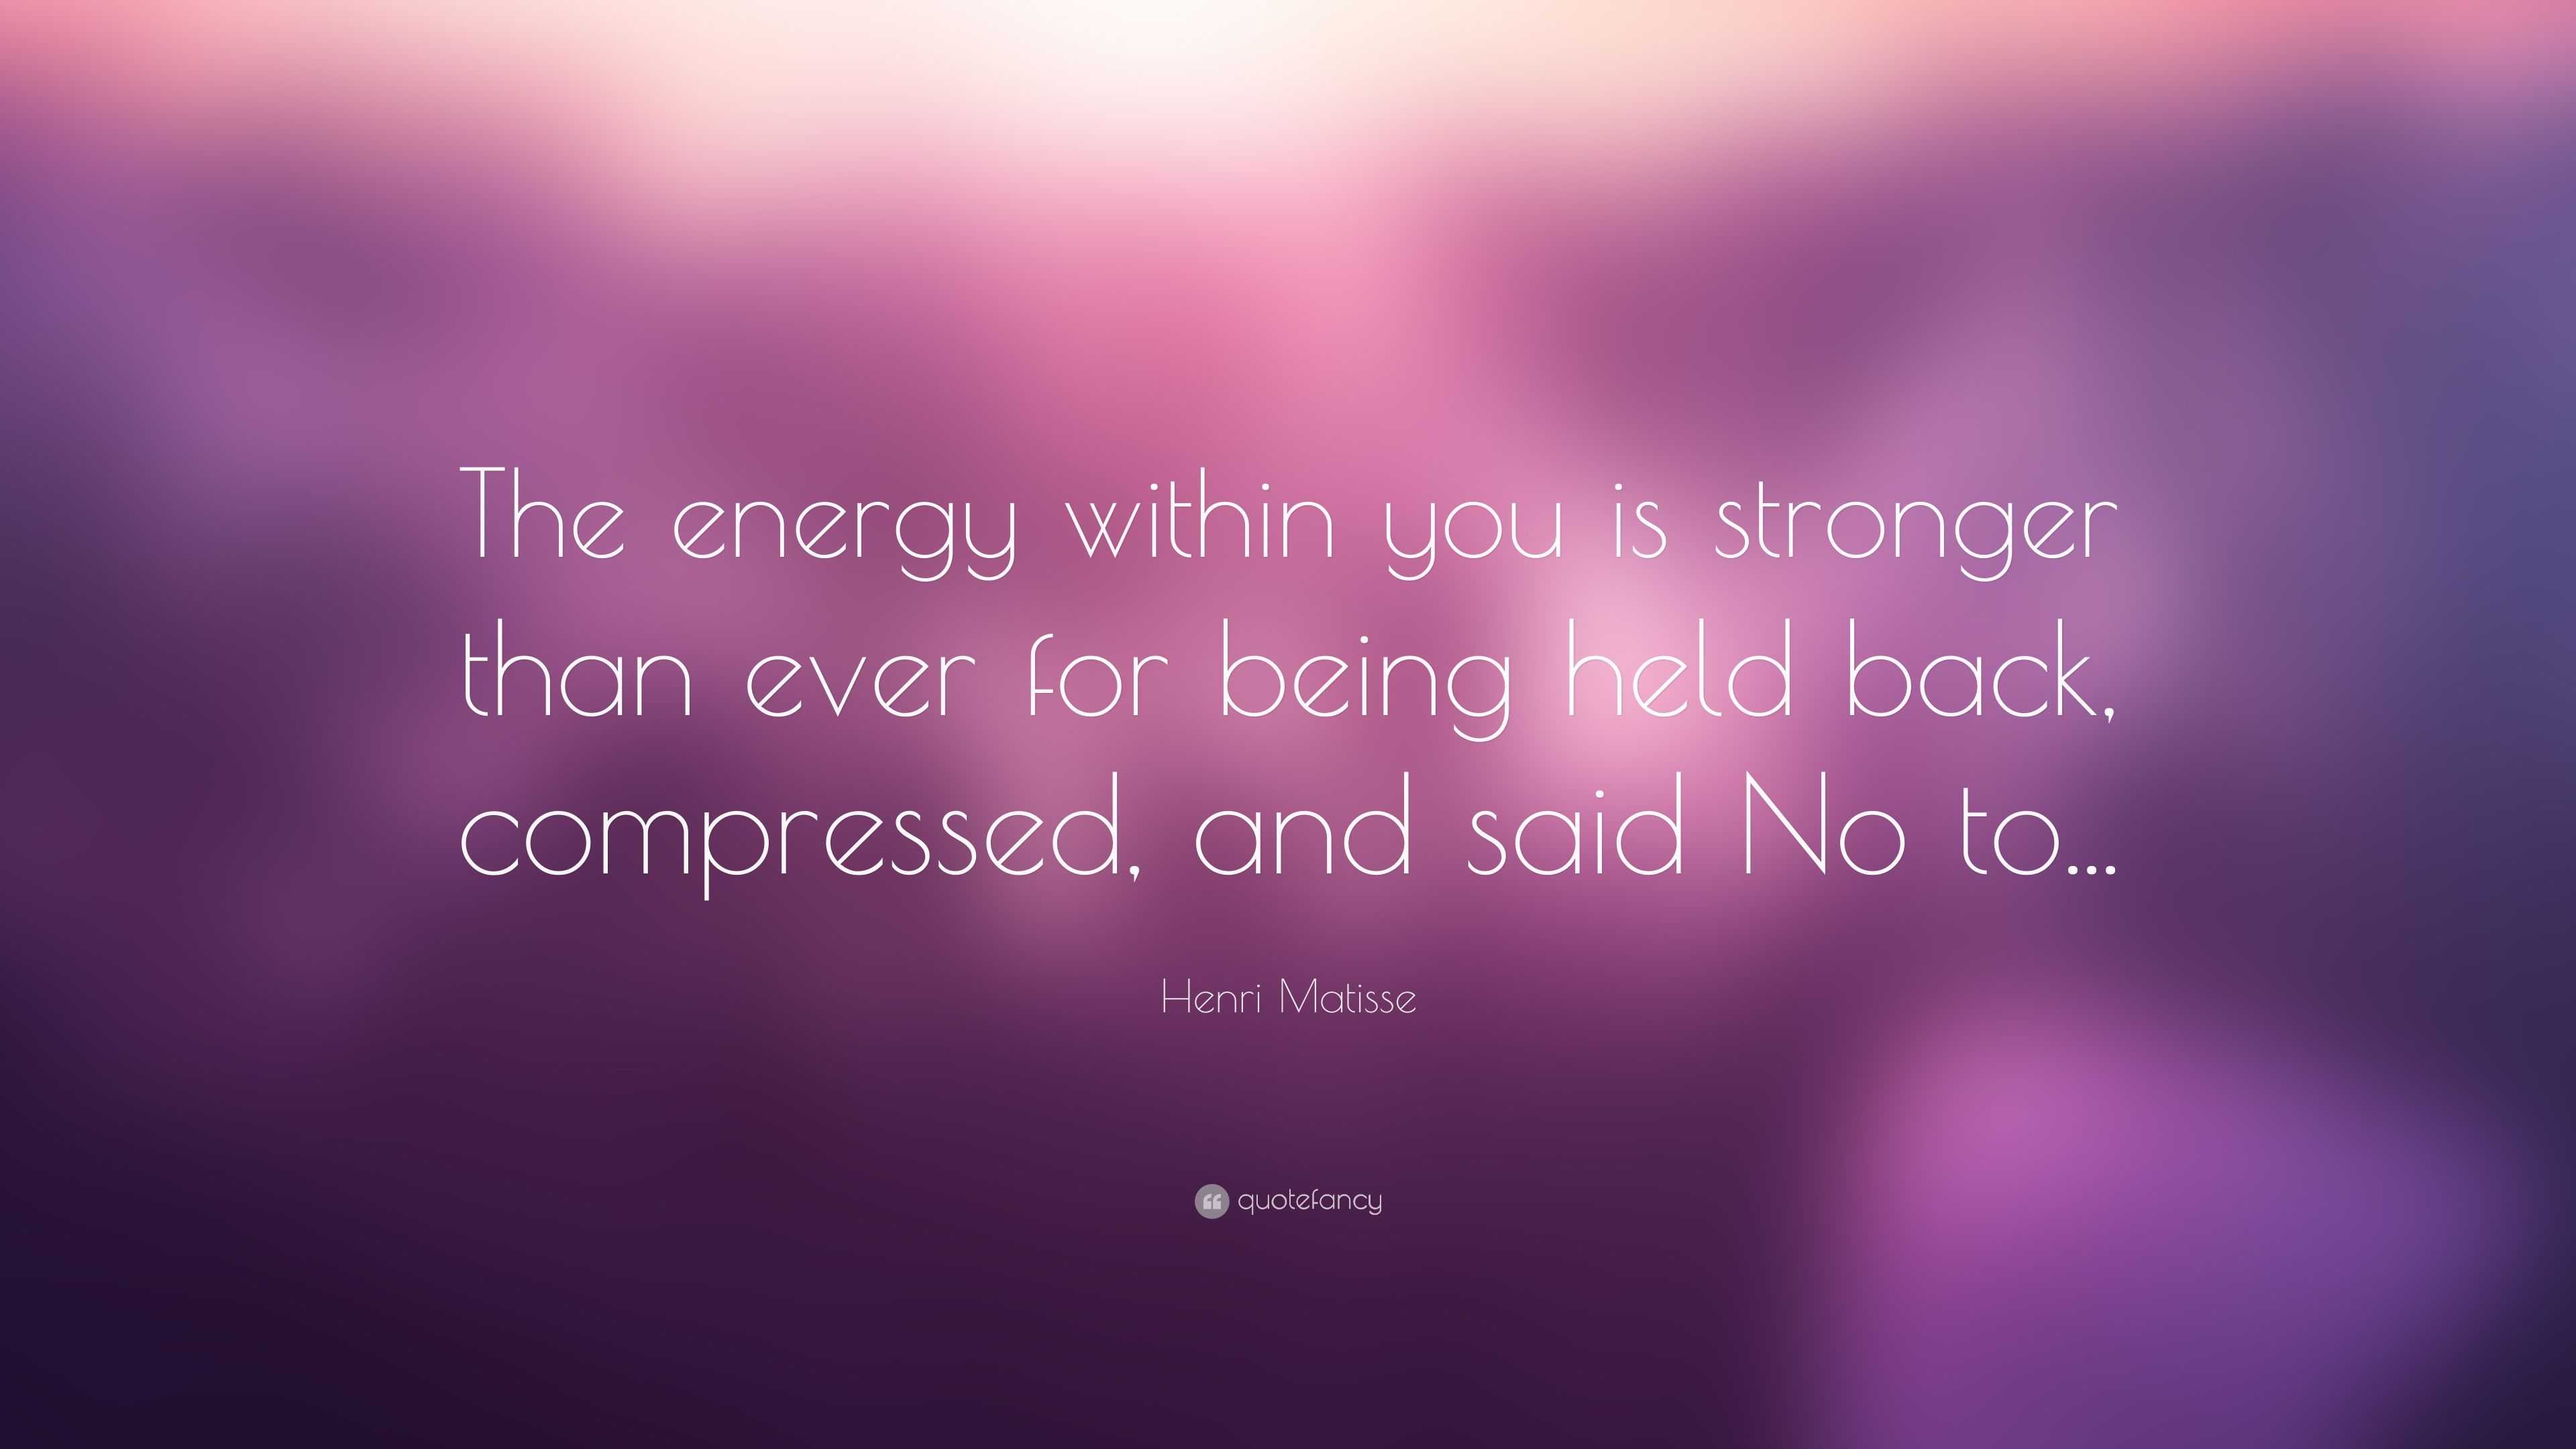 Henri Matisse Quote: “The energy within you is stronger than ever for ...